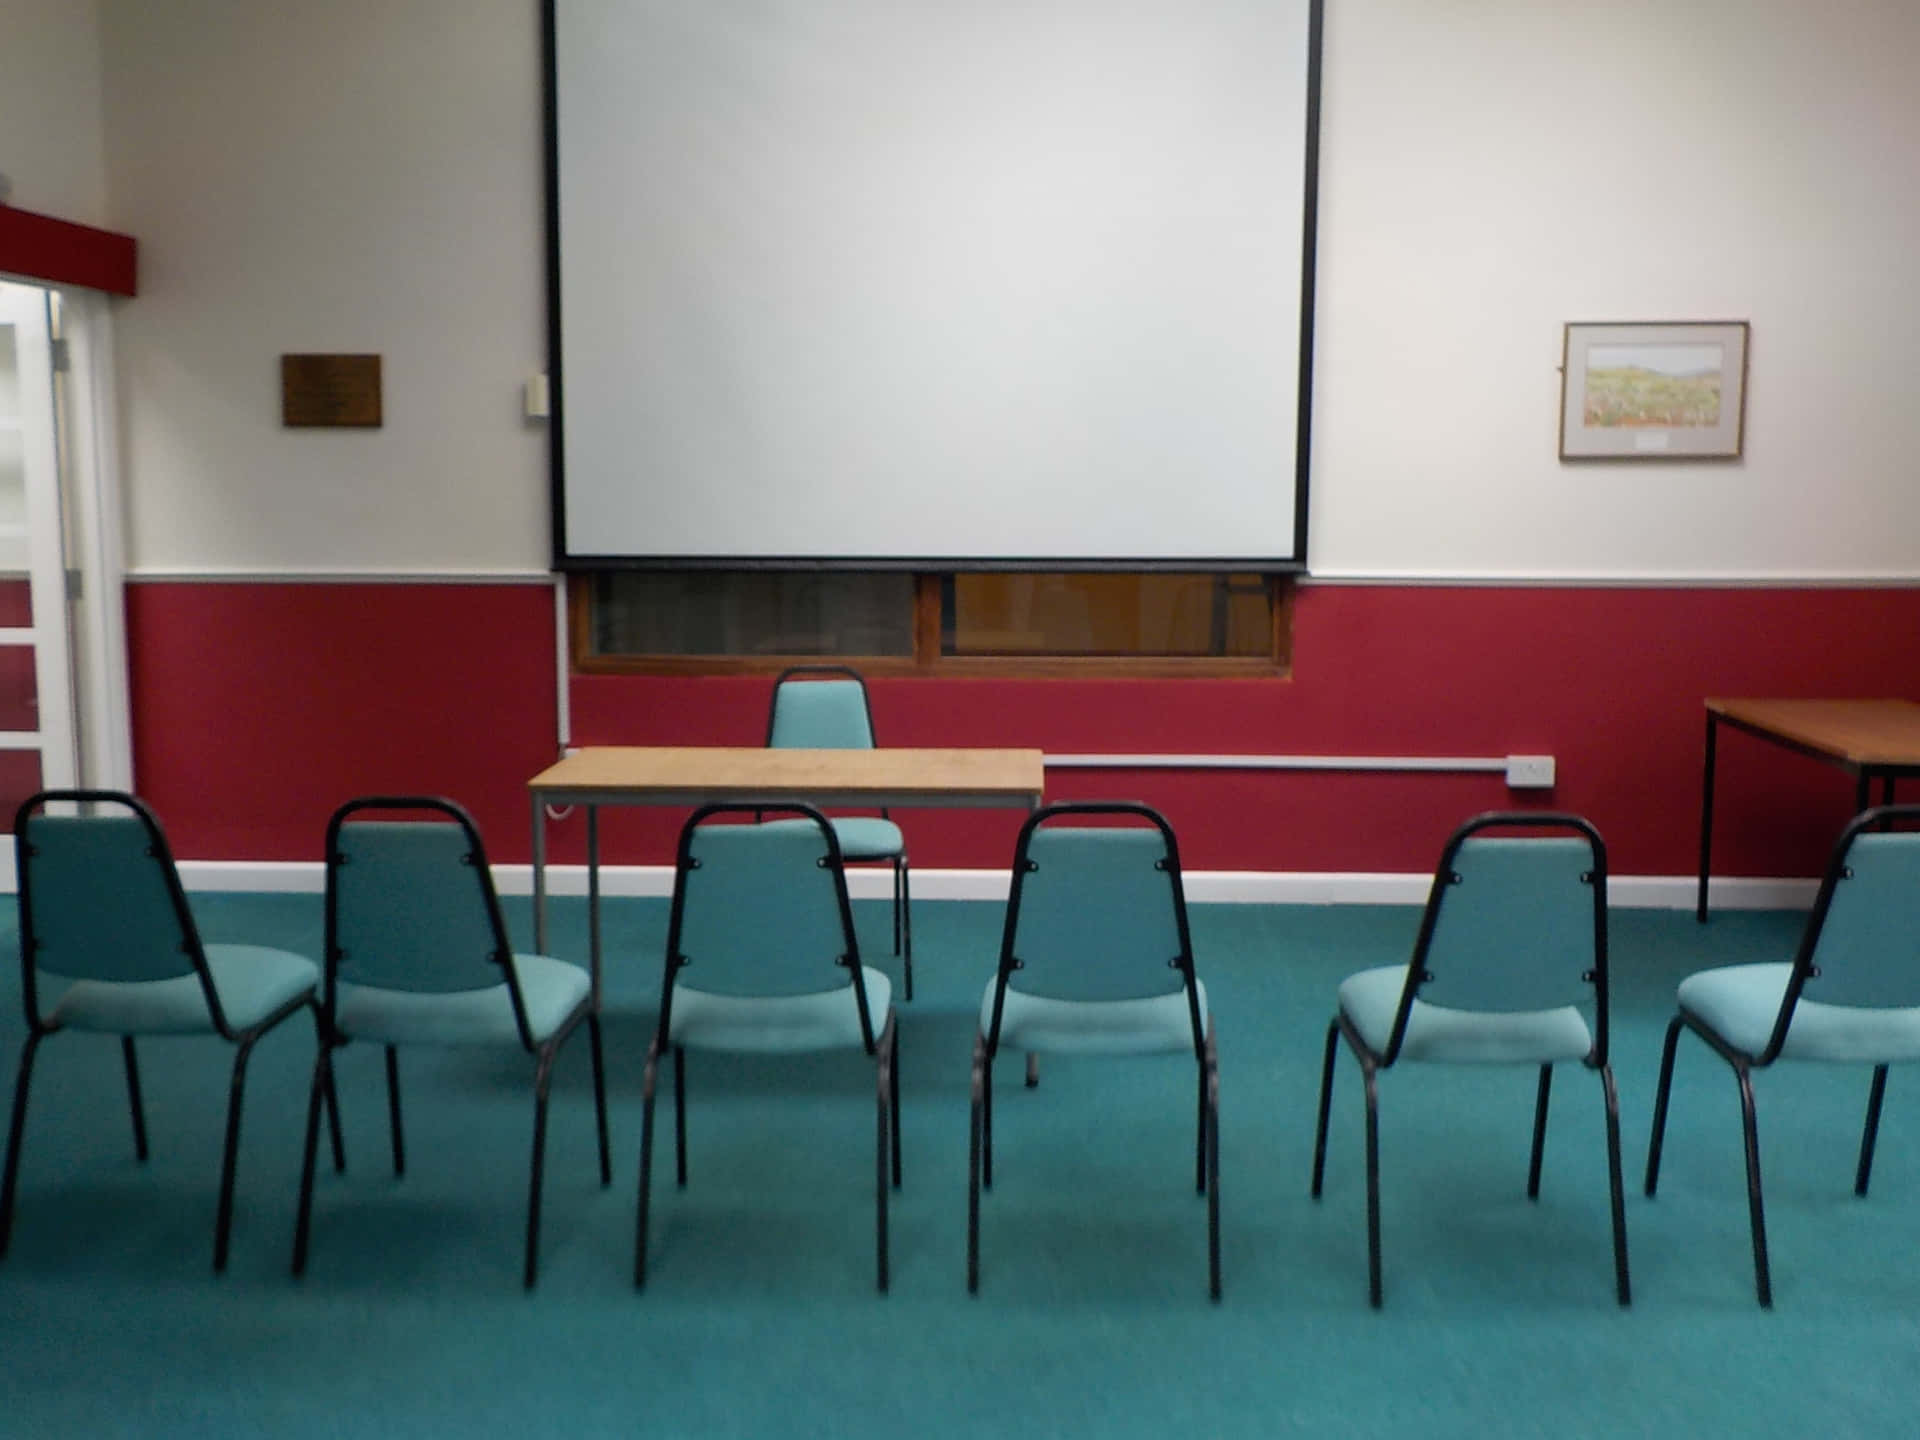 A Room With Chairs And A Projector Screen